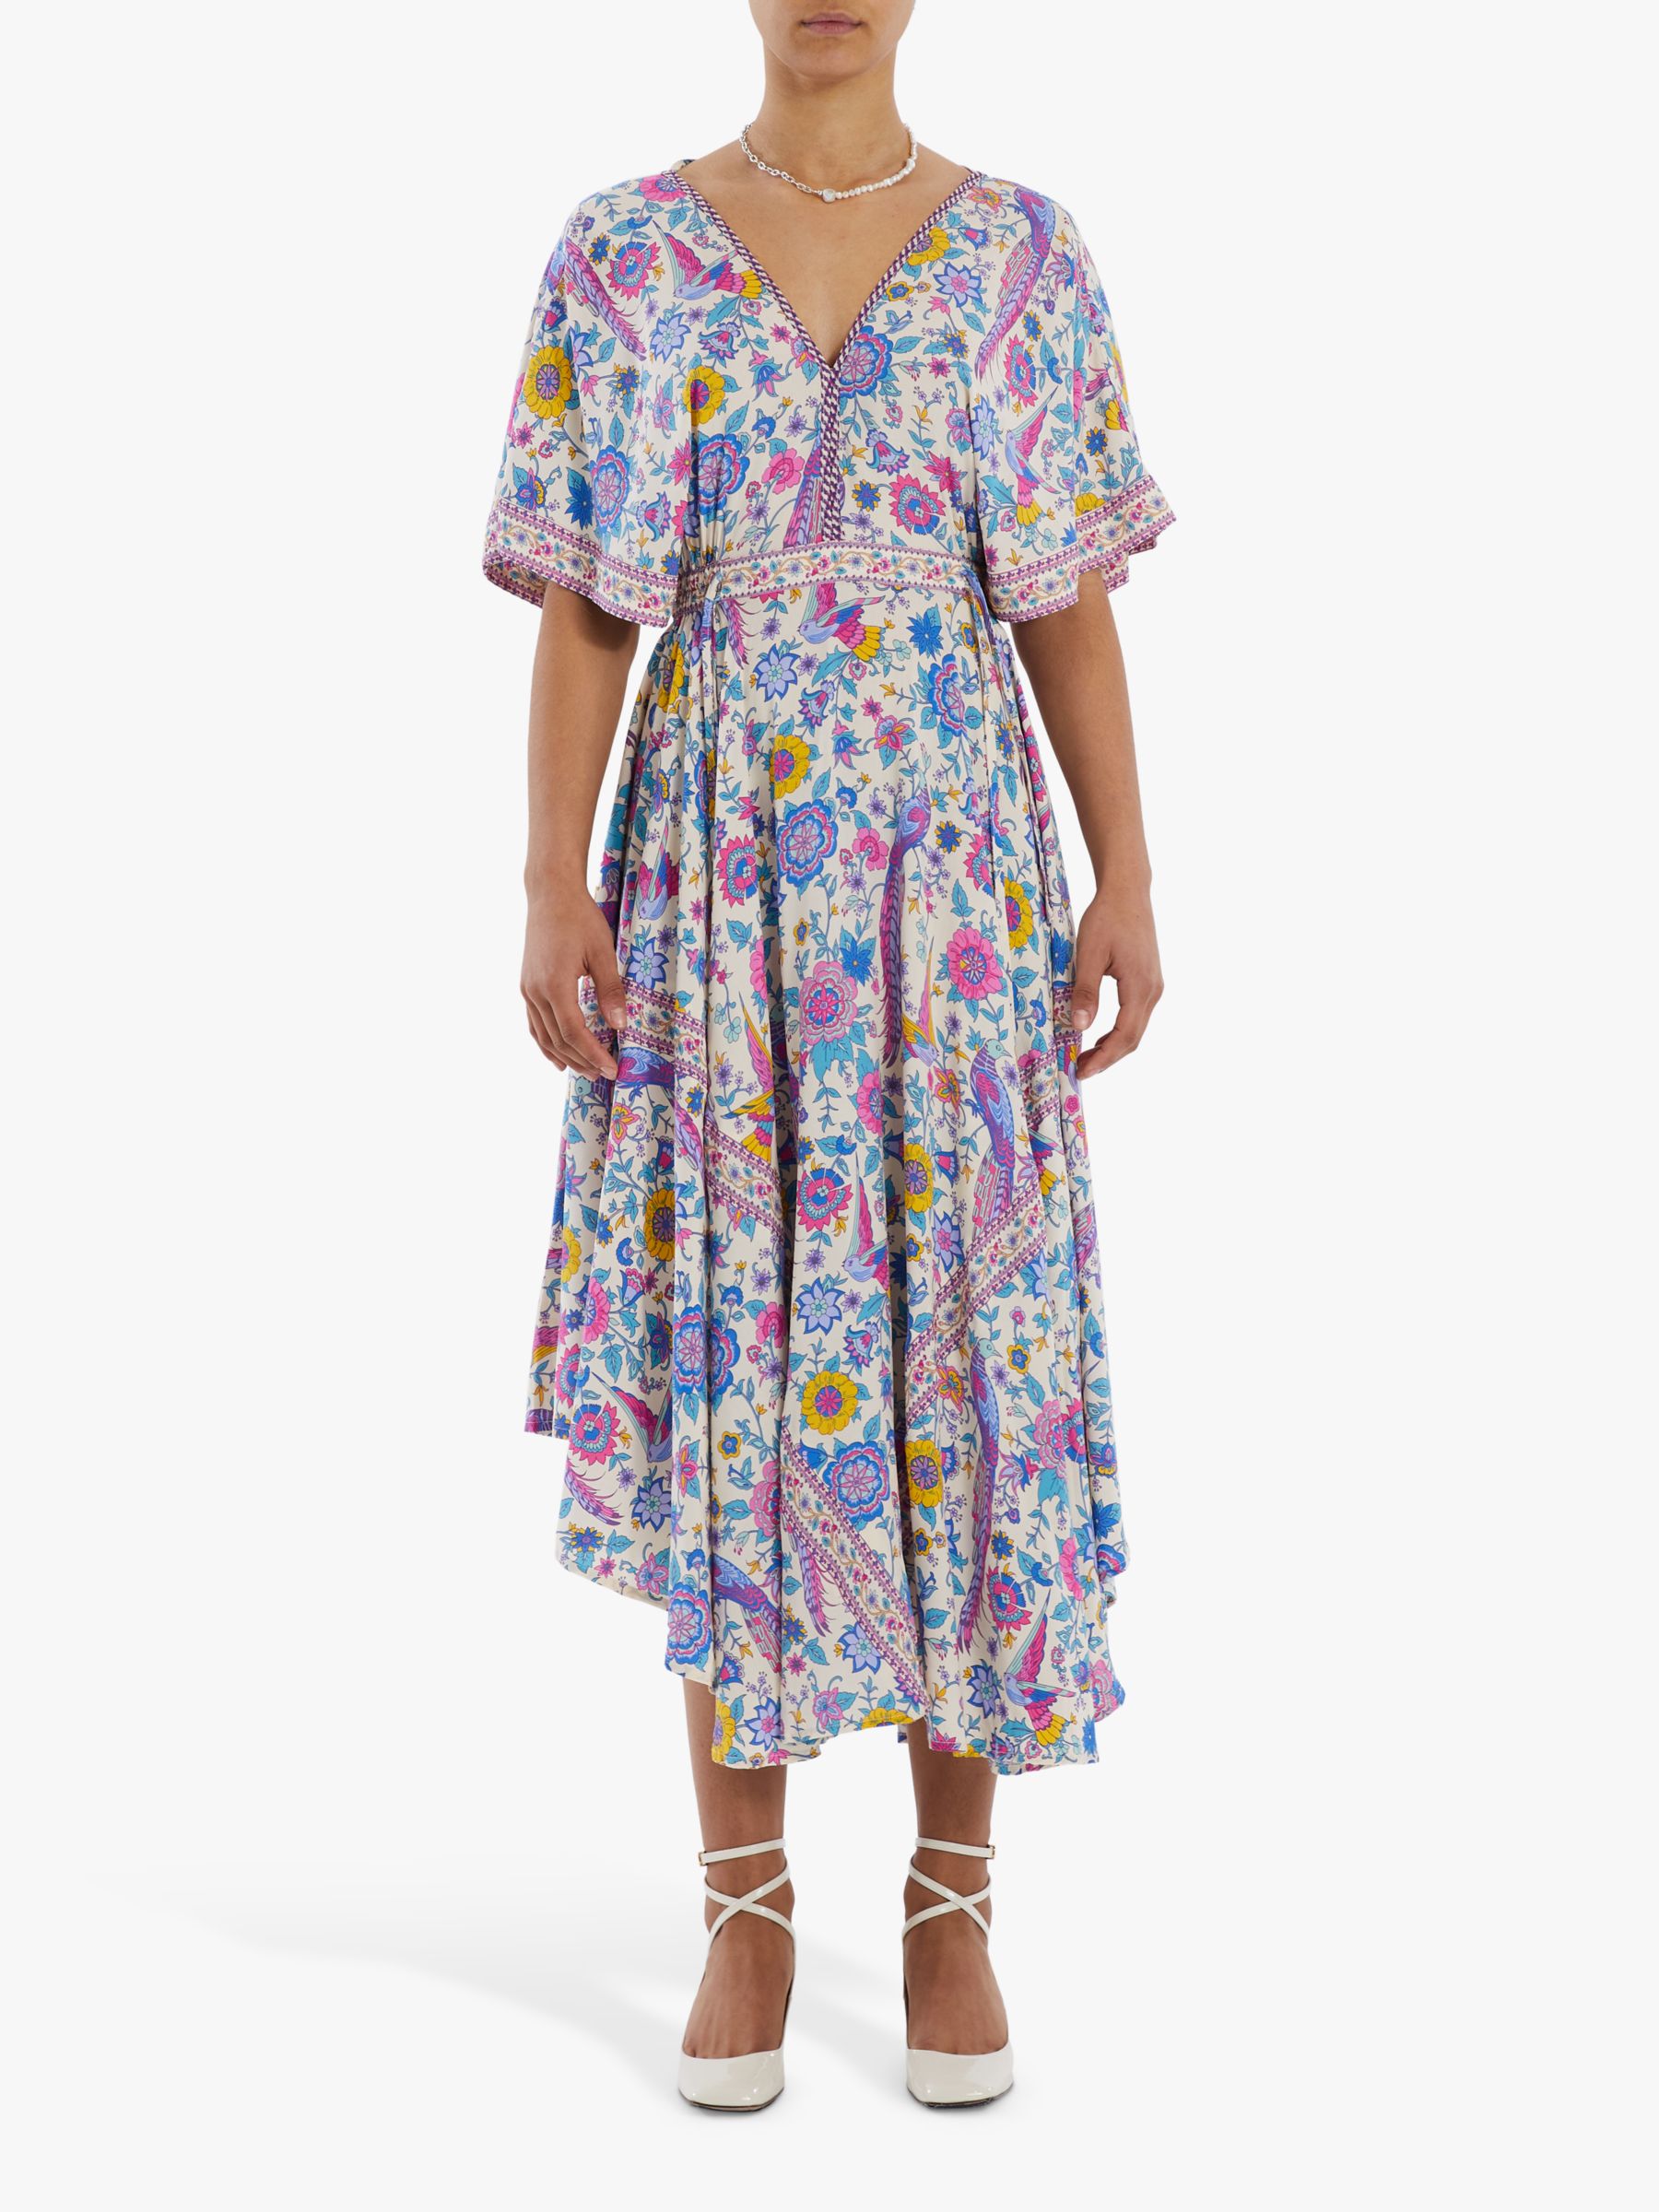 Lollys Laundry Nightingale Floral Dress, Multi at John Lewis & Partners